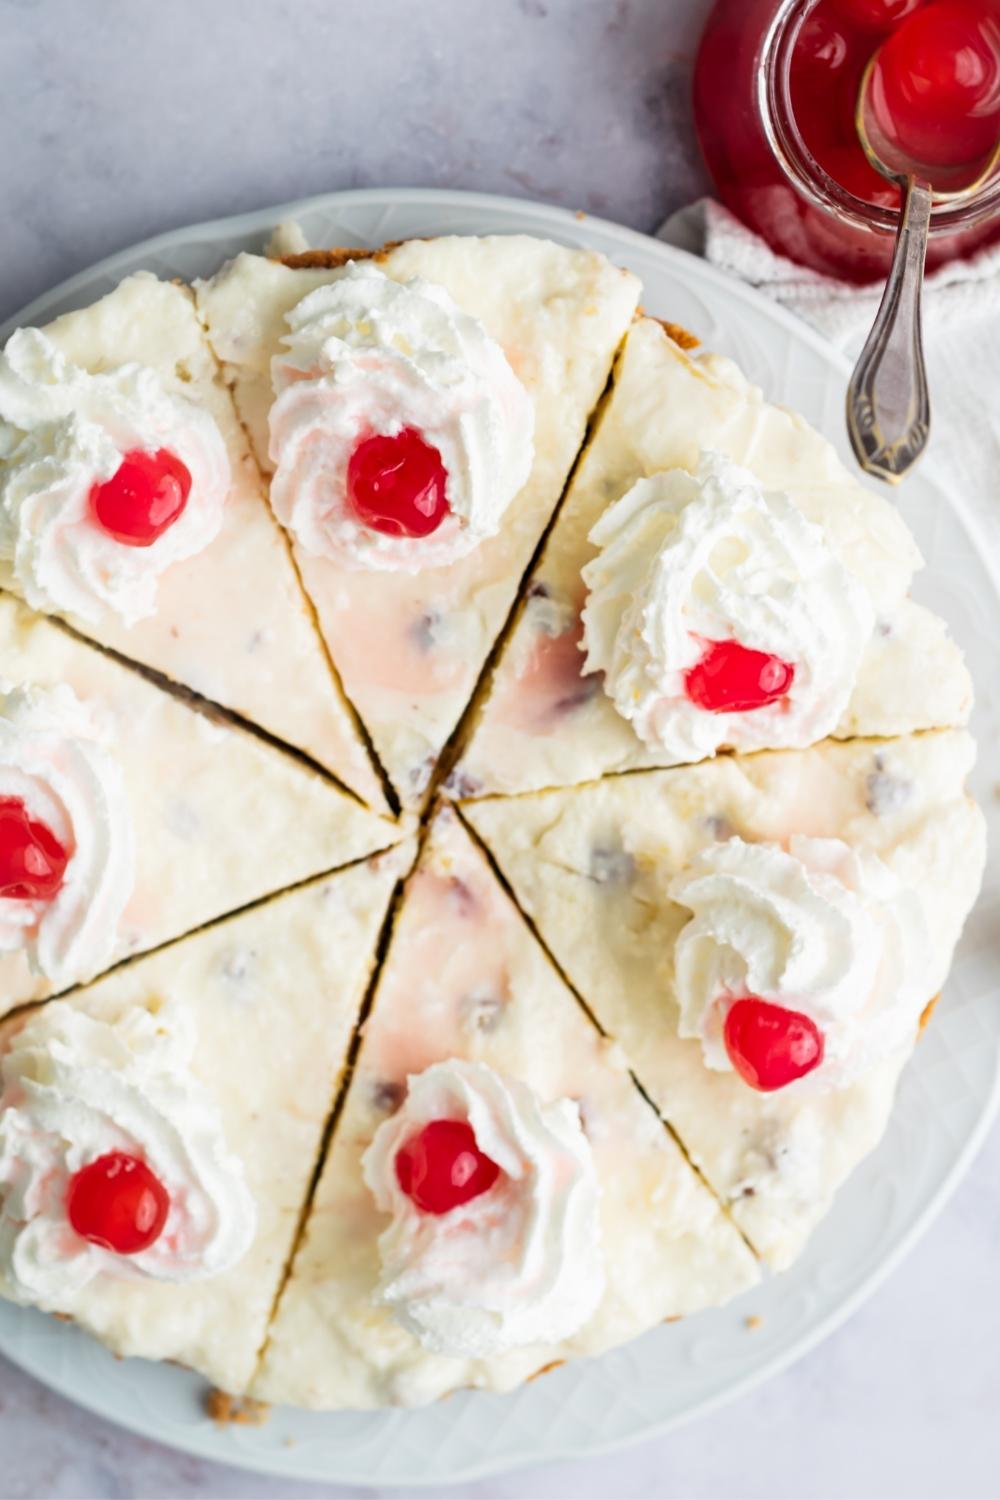 An overhead view of a homemade million dollar pie sliced and topped with whipped cream and cherries.